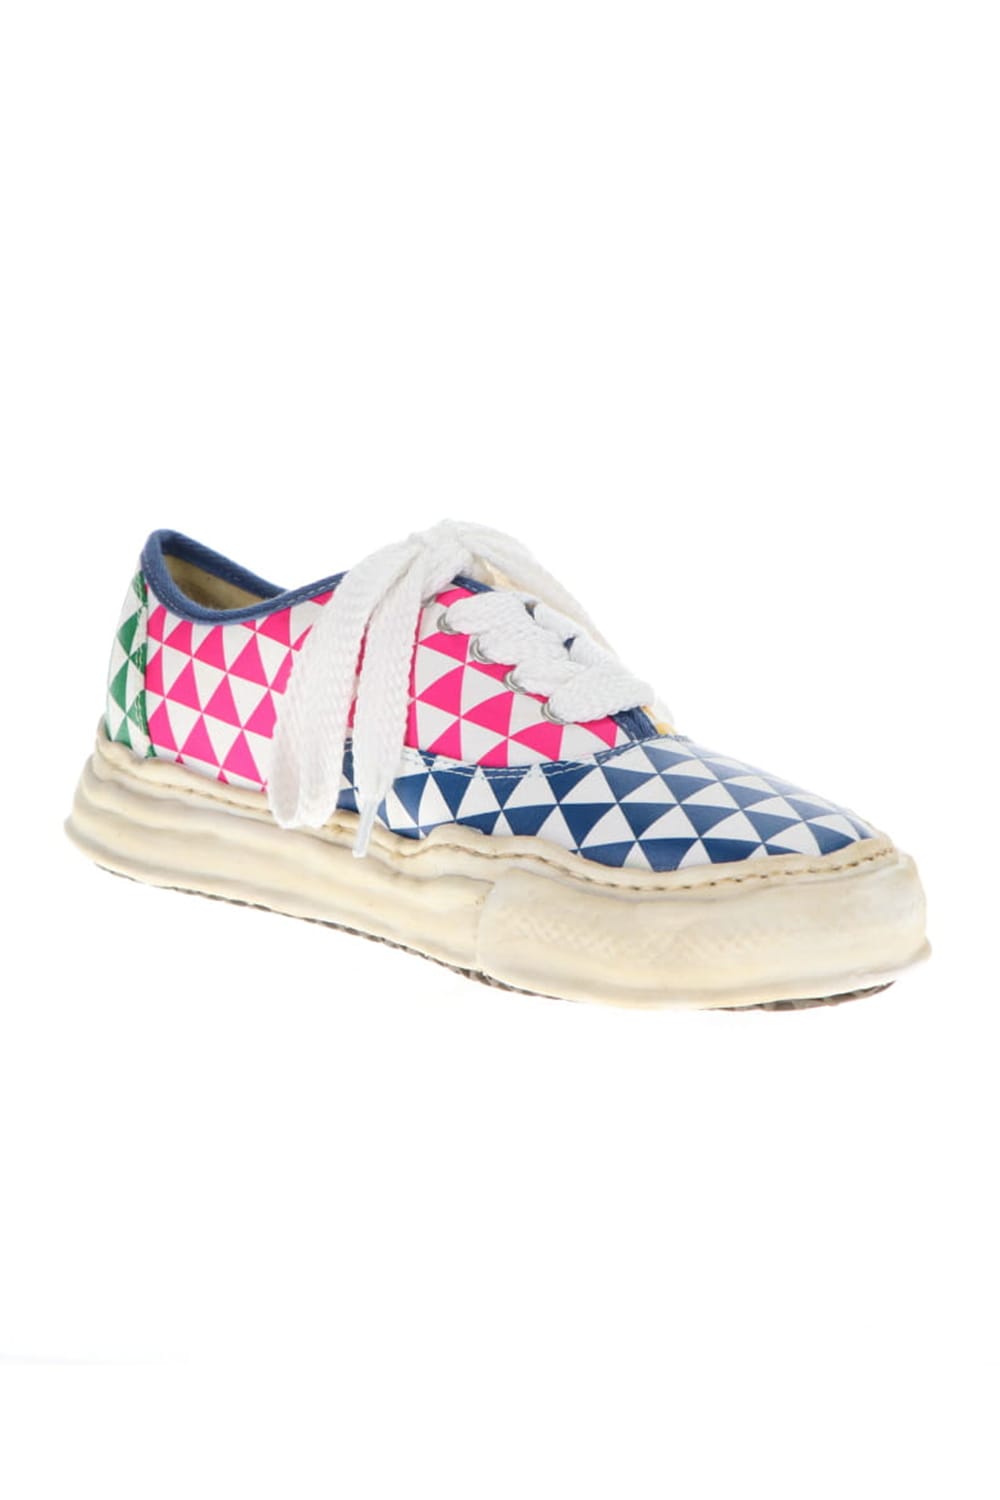 -BAKER- Over-dyed original sole printed canvas Low-Top sneakers Multi